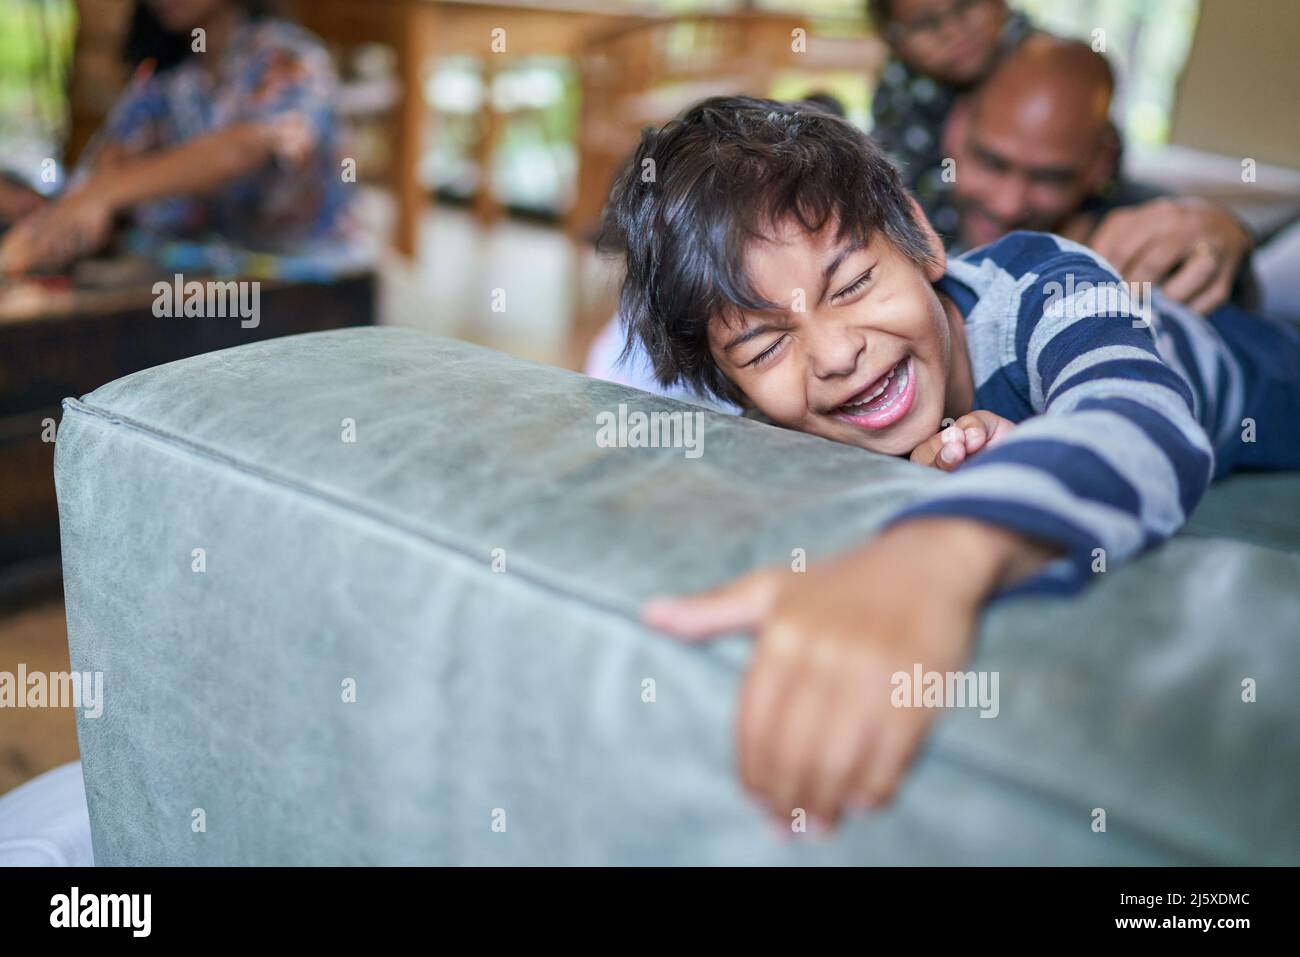 Laughing boy being tickled on sofa Stock Photo